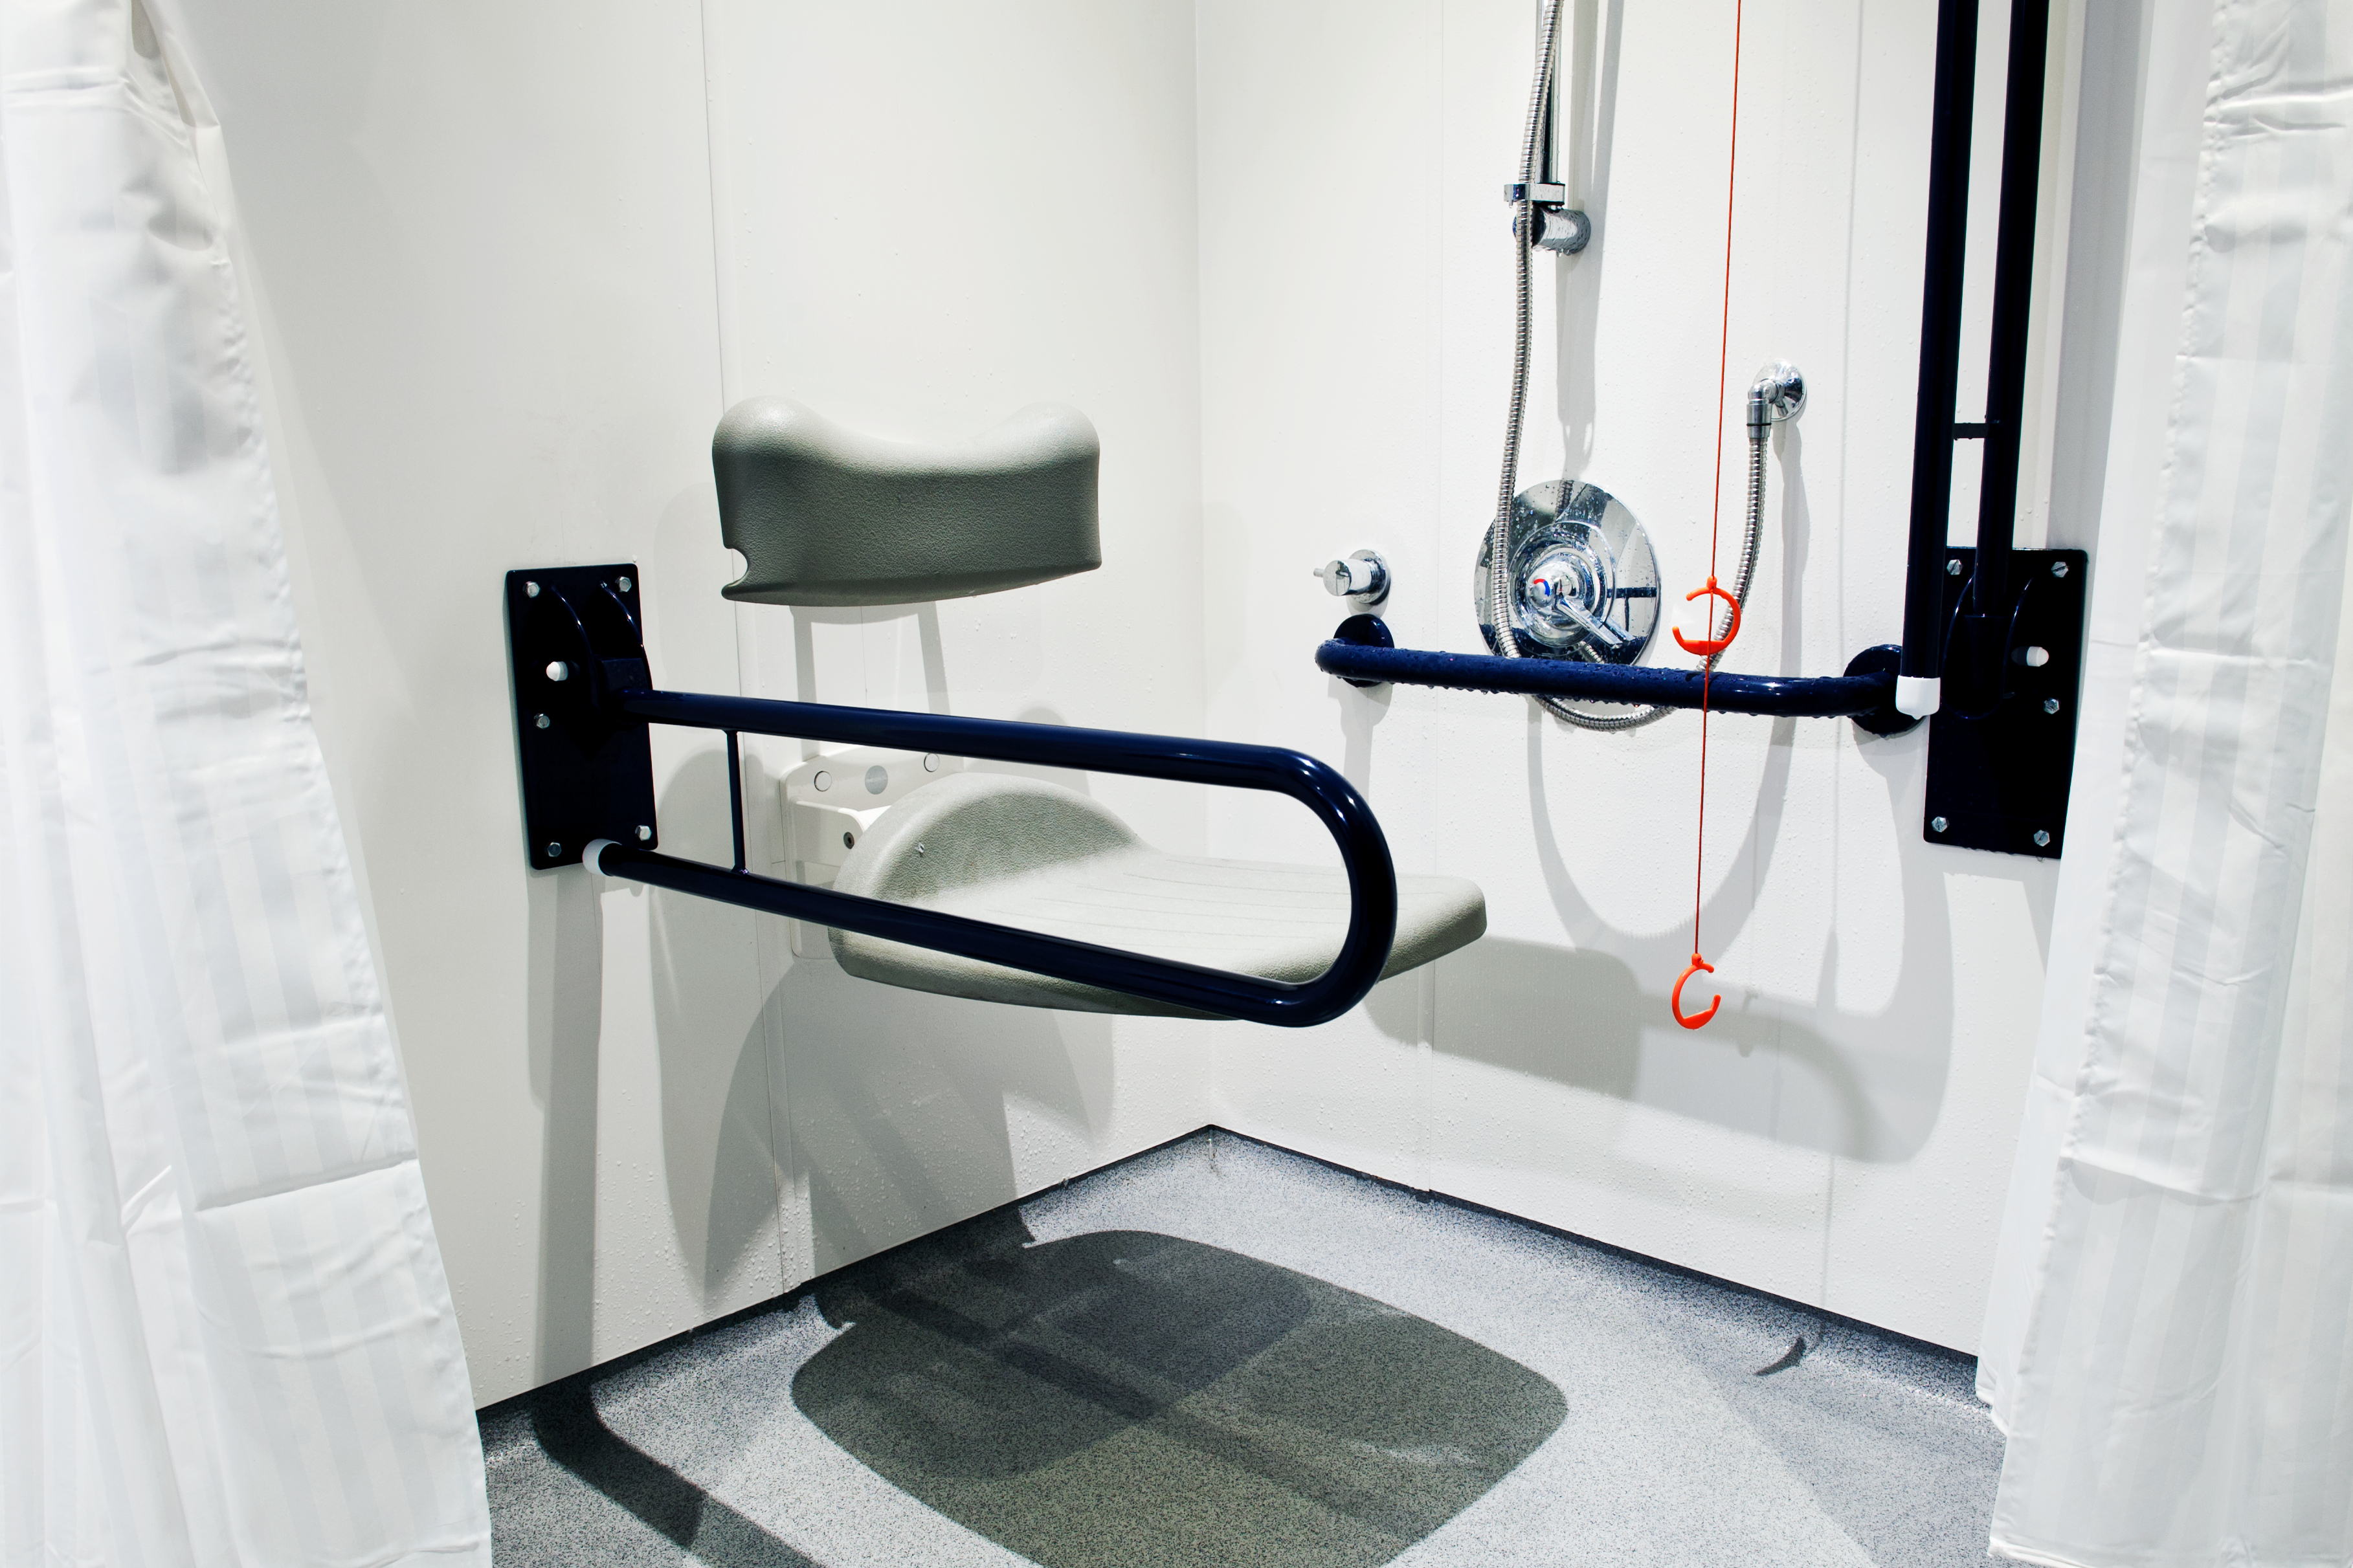 A Typical Disabled Accessible Toilet Refurbishment Specification